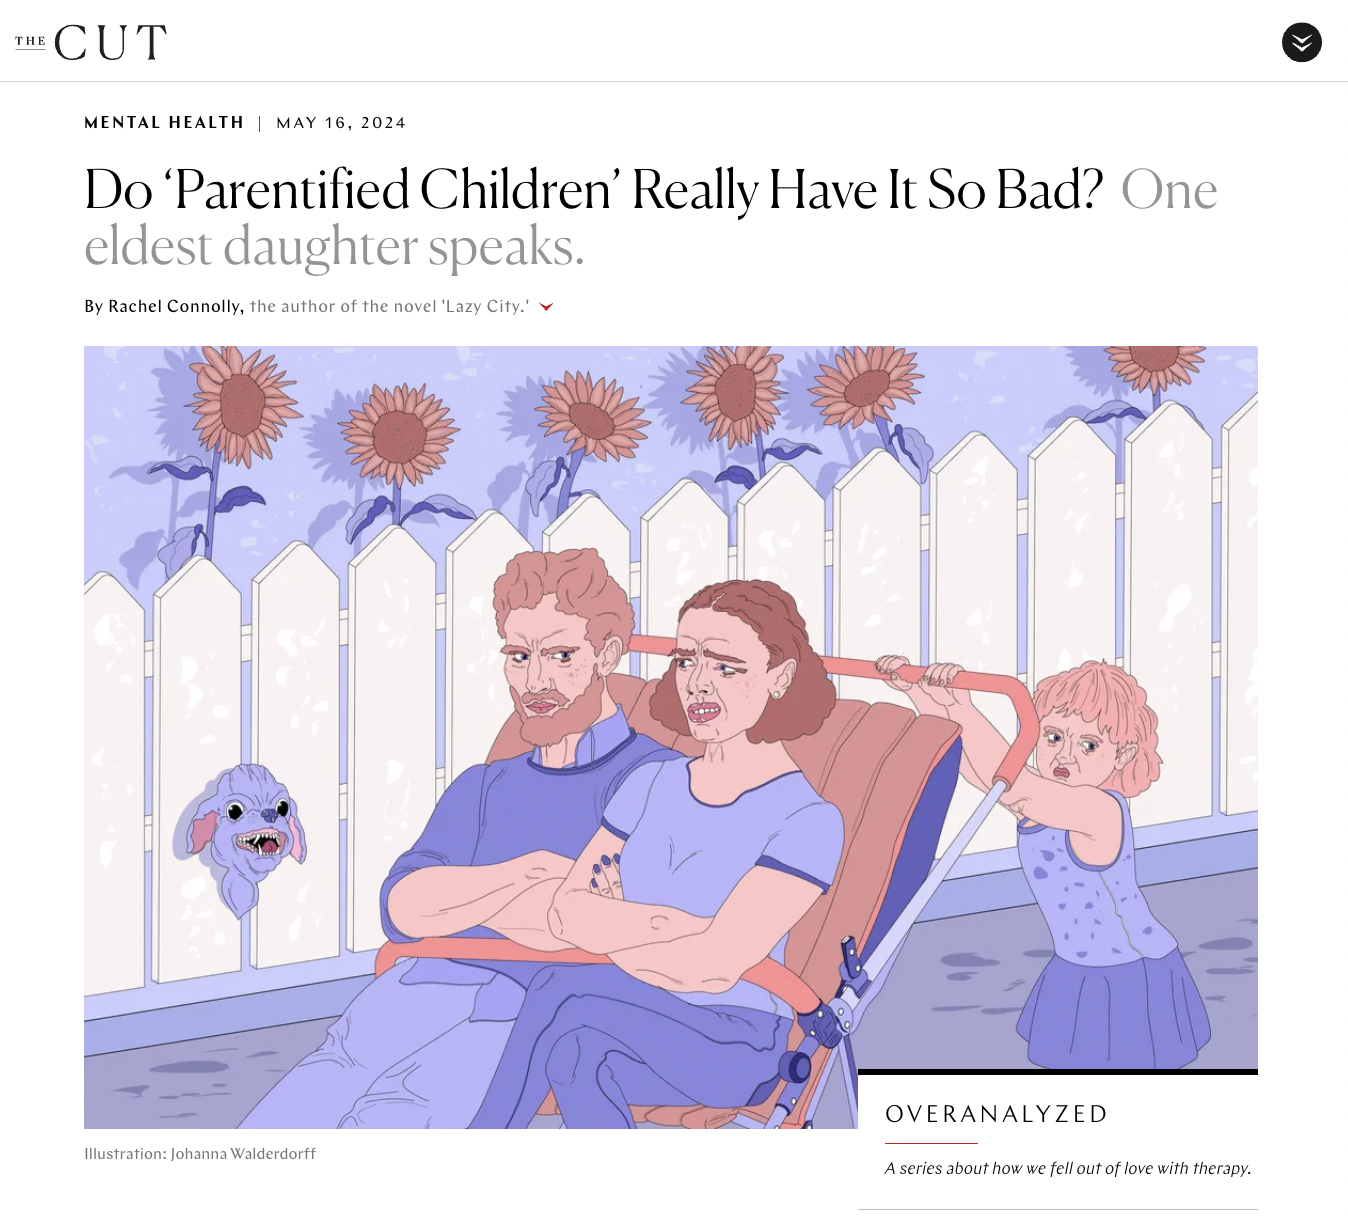 illustration - The Cut Mental Health Do 'Parentified Children' Really Have It So Bad? One eldest daughter speaks. By Rachel Connolly, the author of the novel "Lazy City" Overanalyzed lustration Johanna Walderdorff A series about how we fell out of love wi